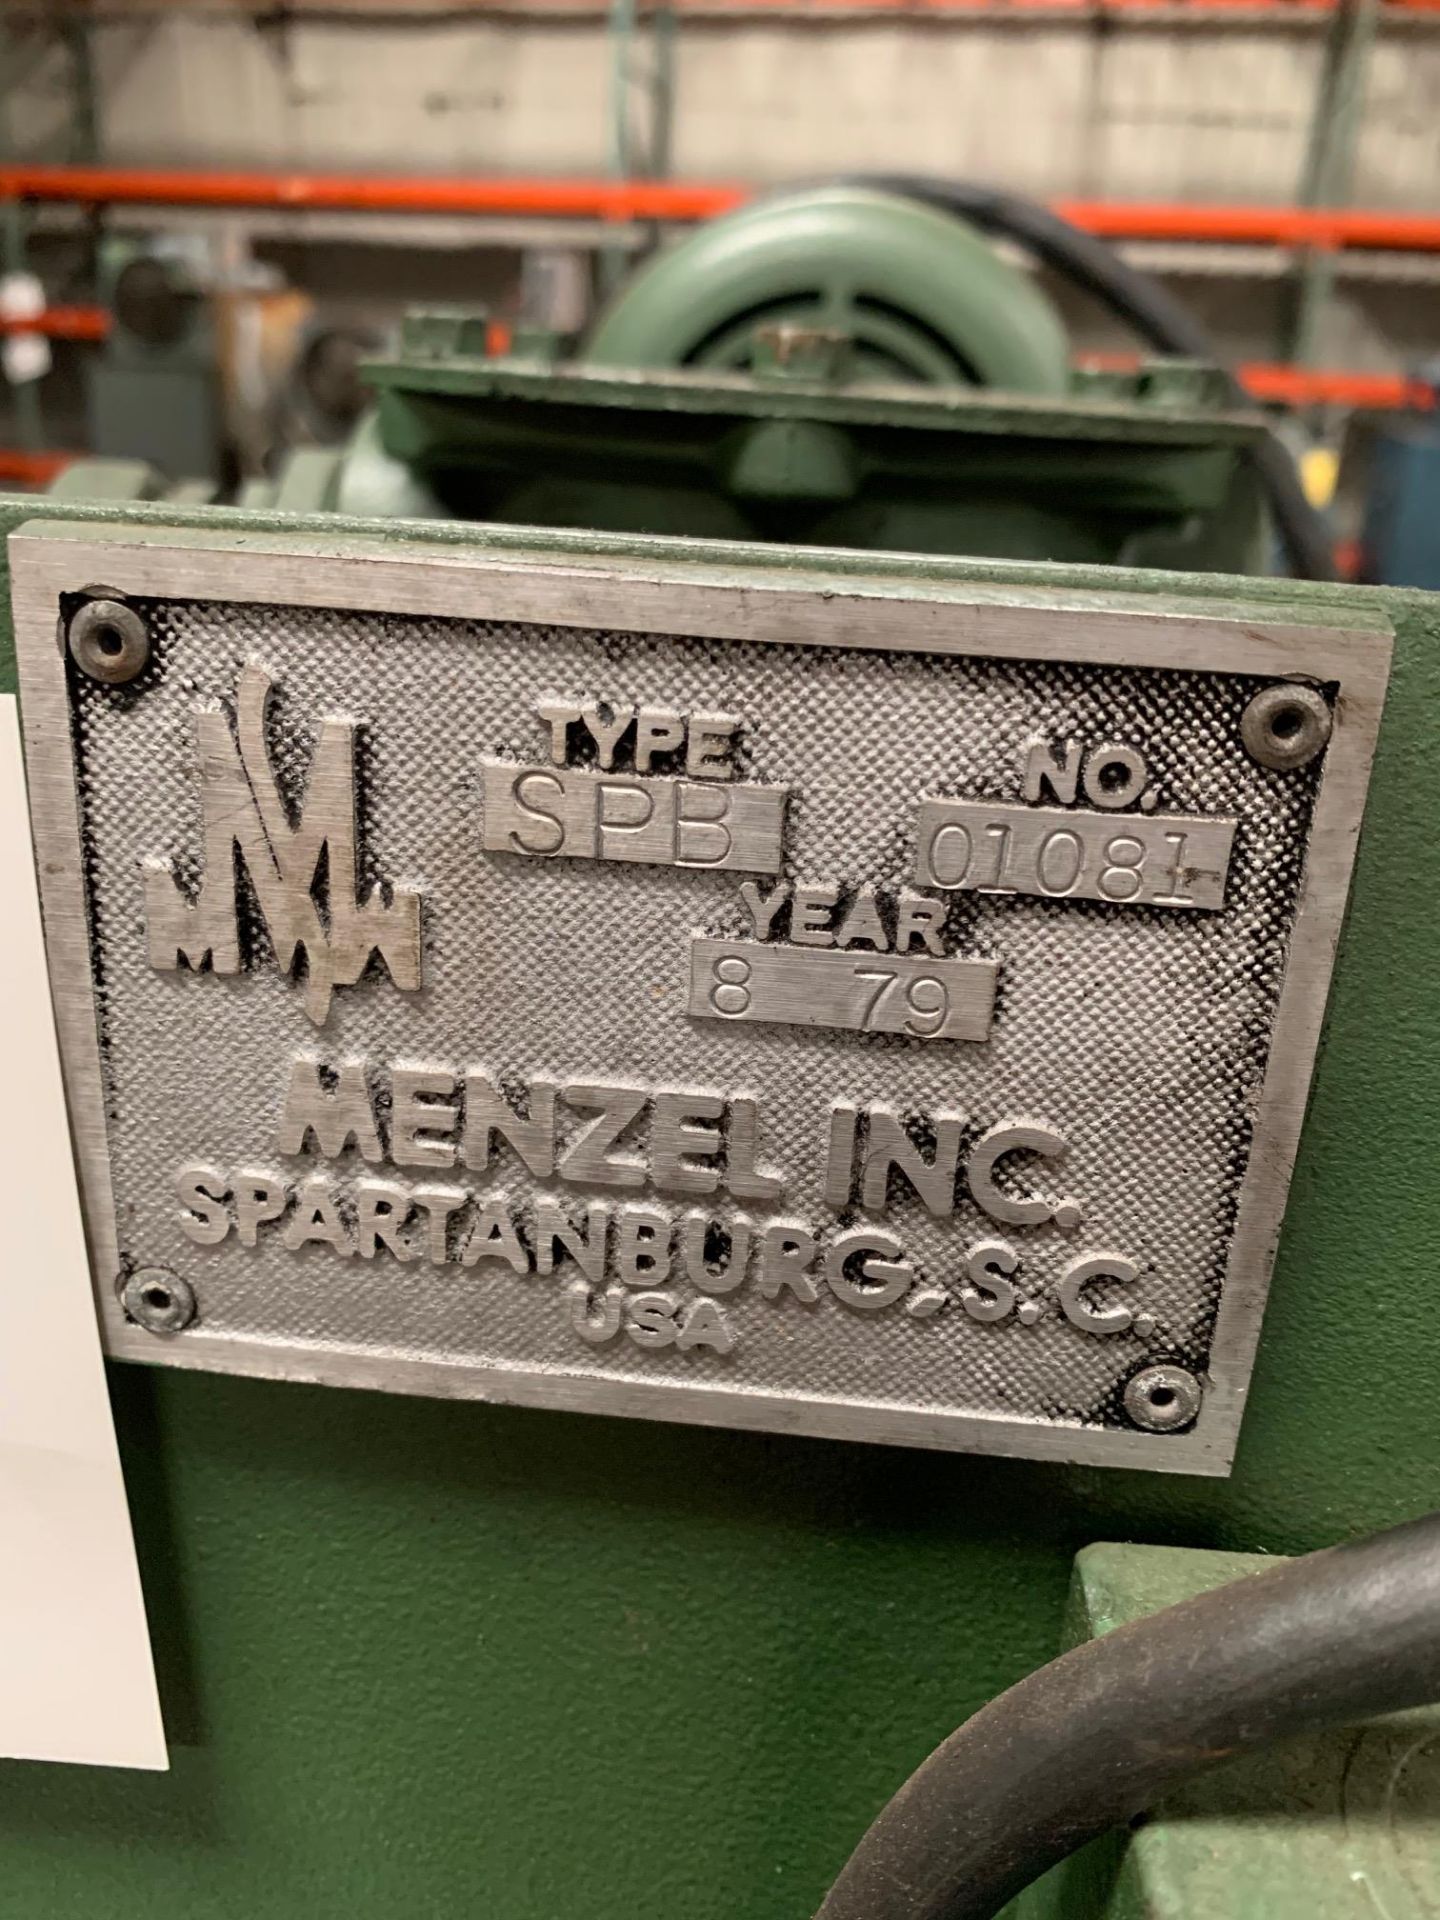 Menzel Hydraulic Unit. Model SPE. Serial 01081. 3Hp. 220/460 Volts, Rigging Fee: $25 - Image 7 of 9